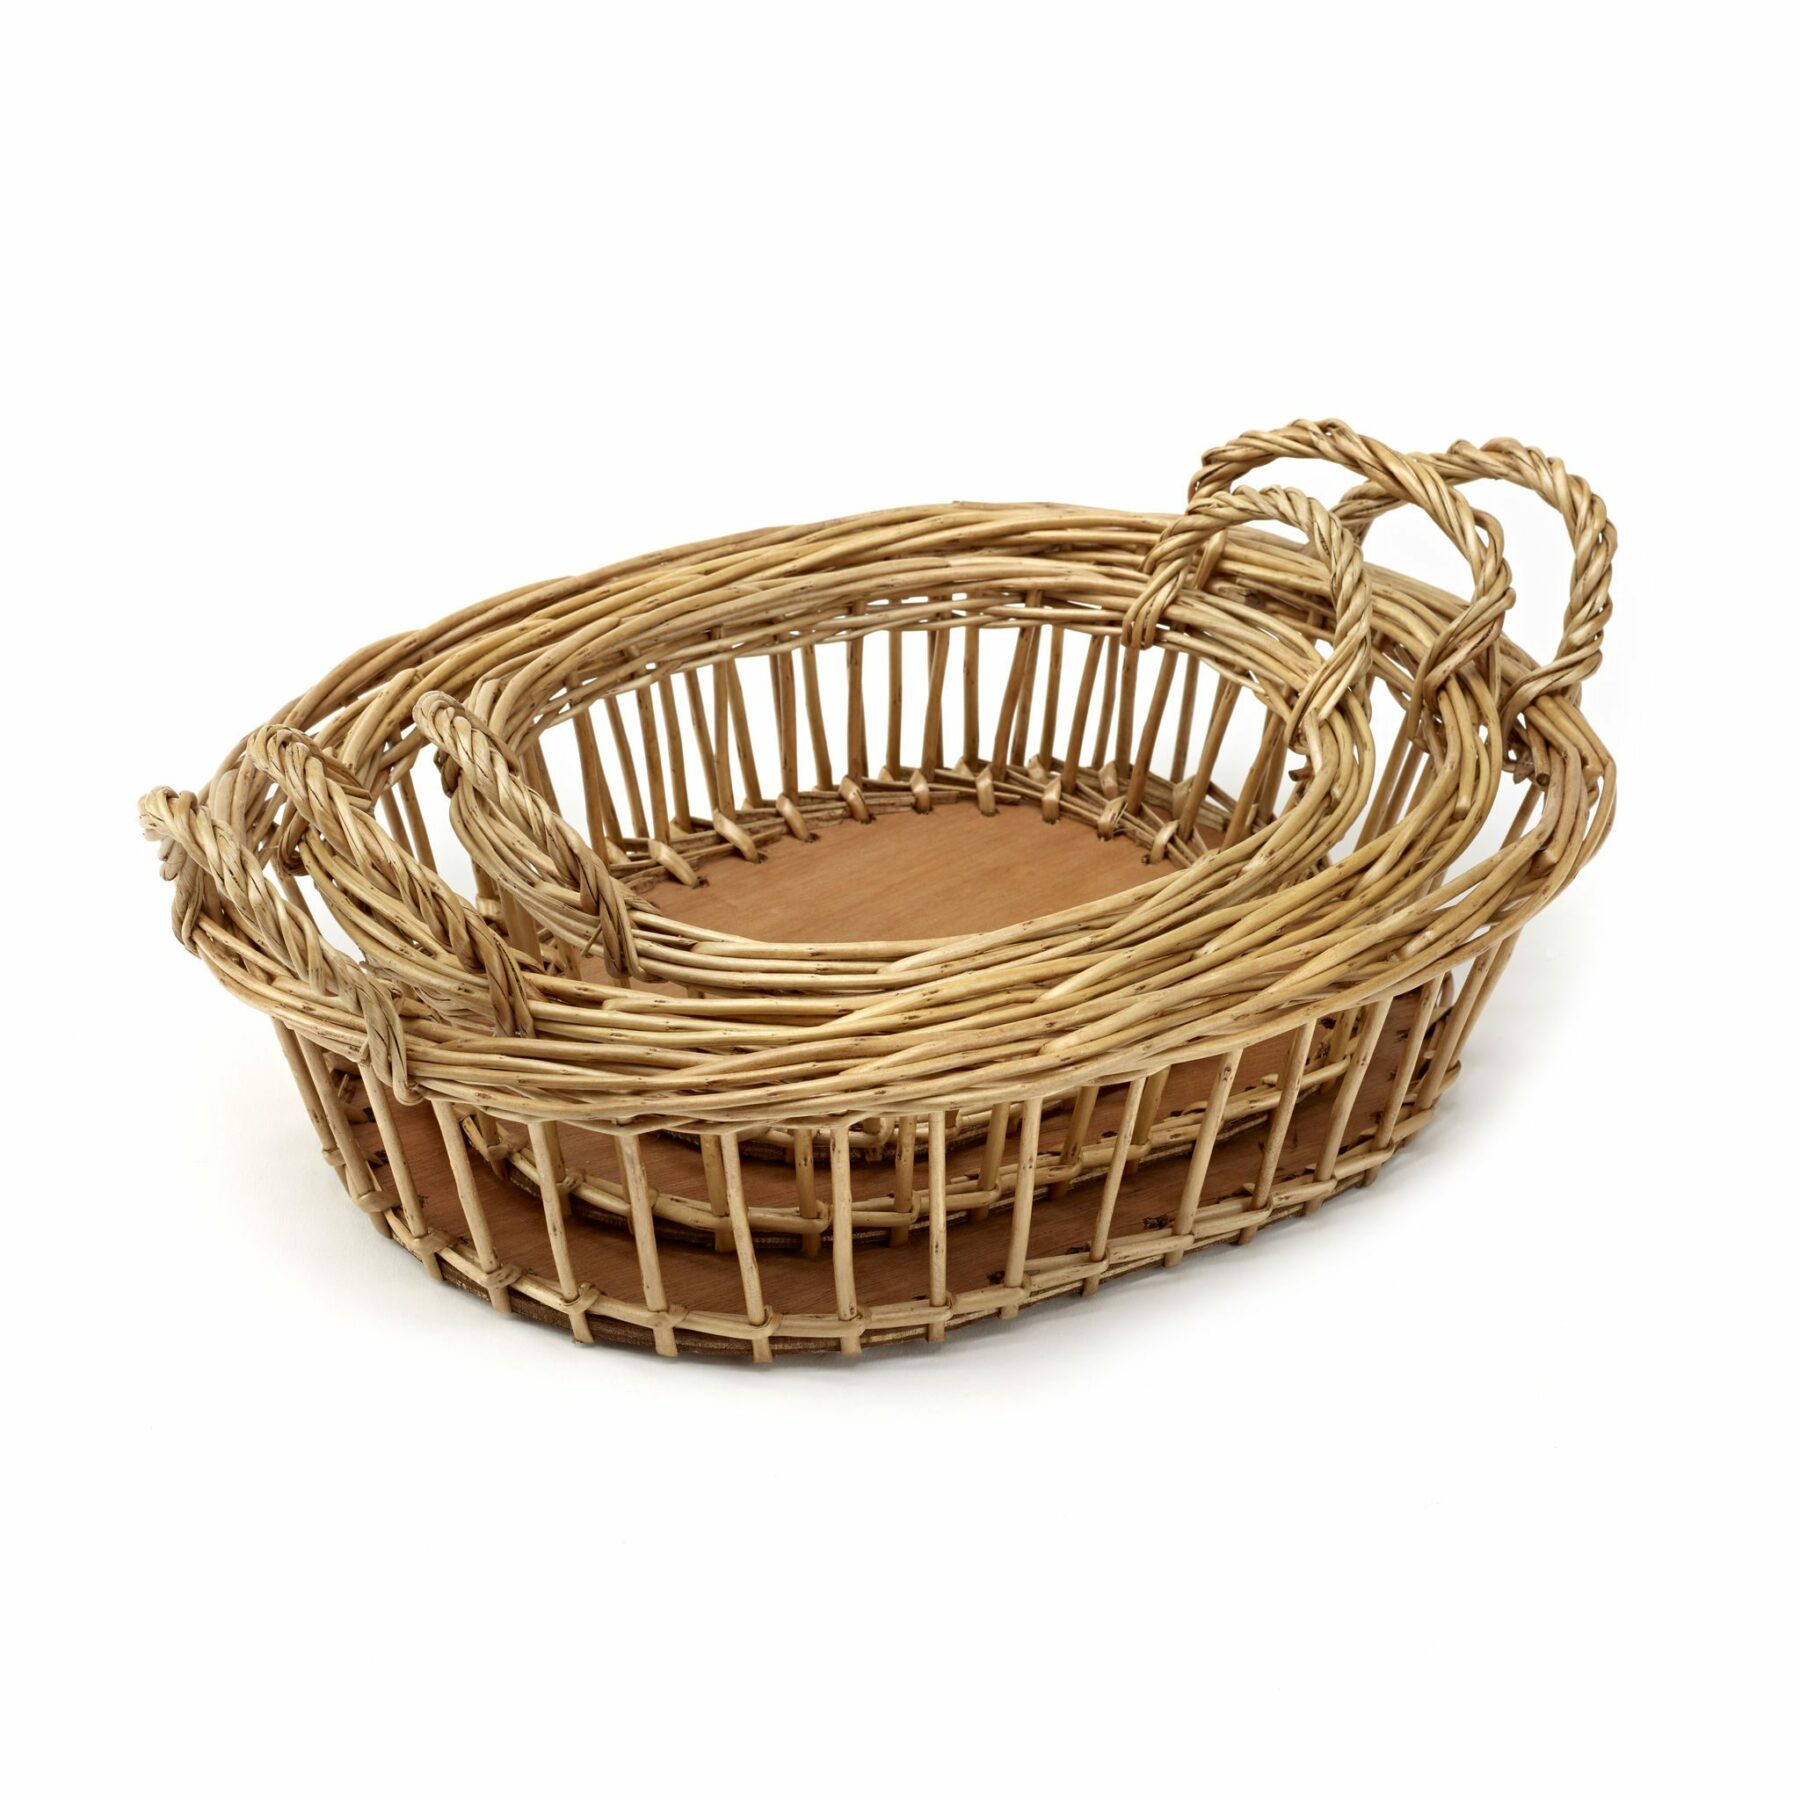 Set of 3 Oval Baskets with Handles